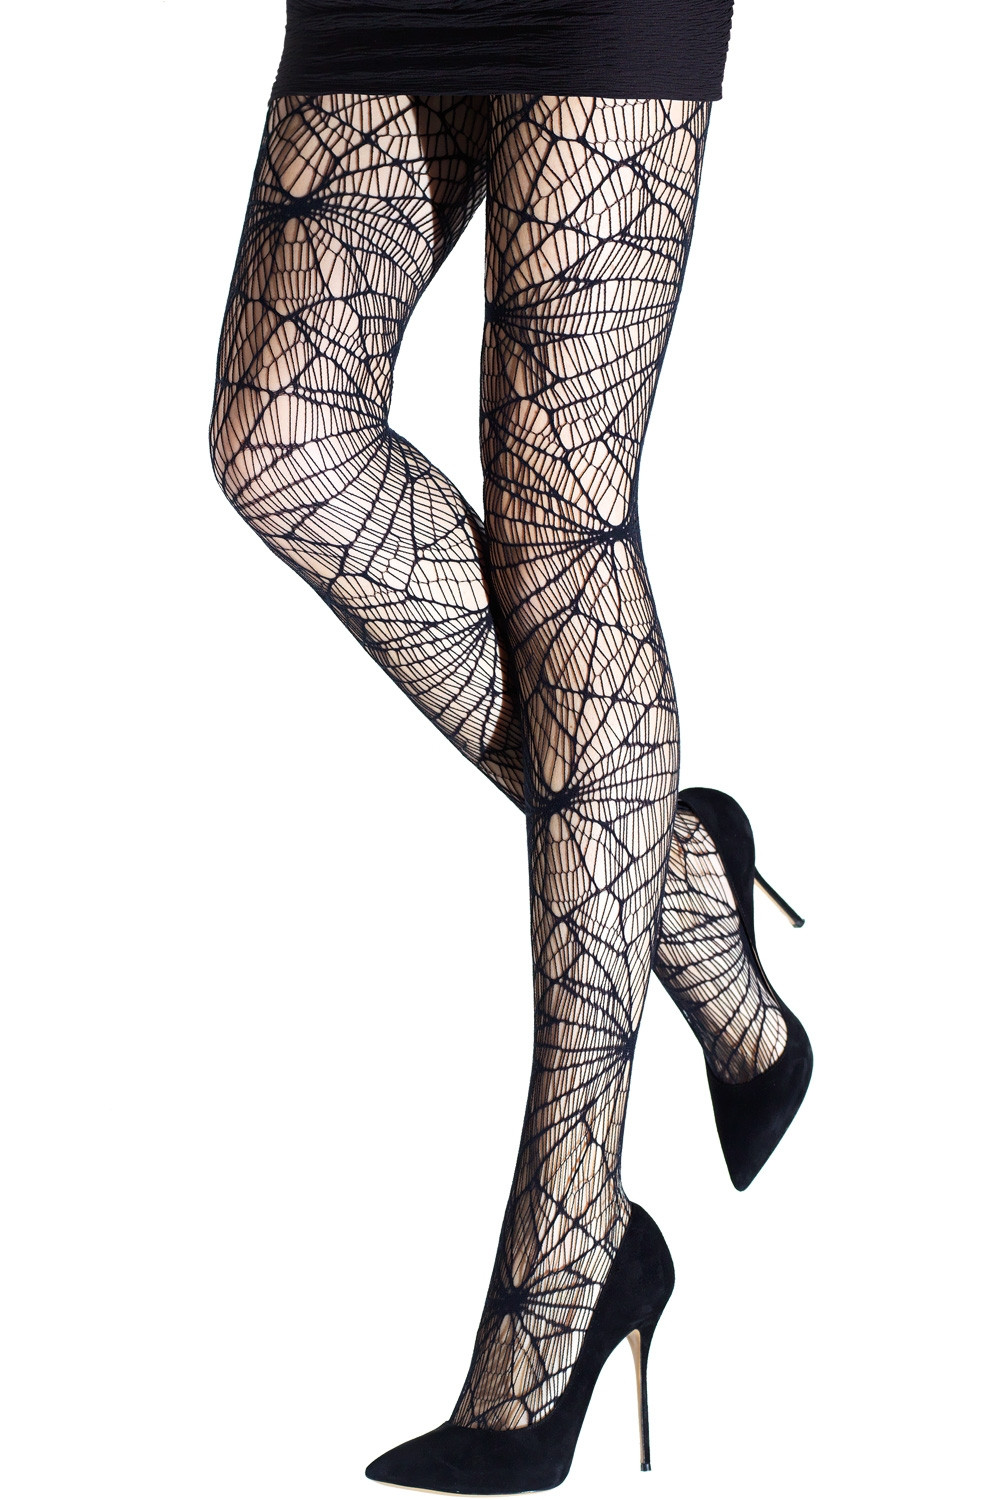 Women's Black Banded Gothic Tights